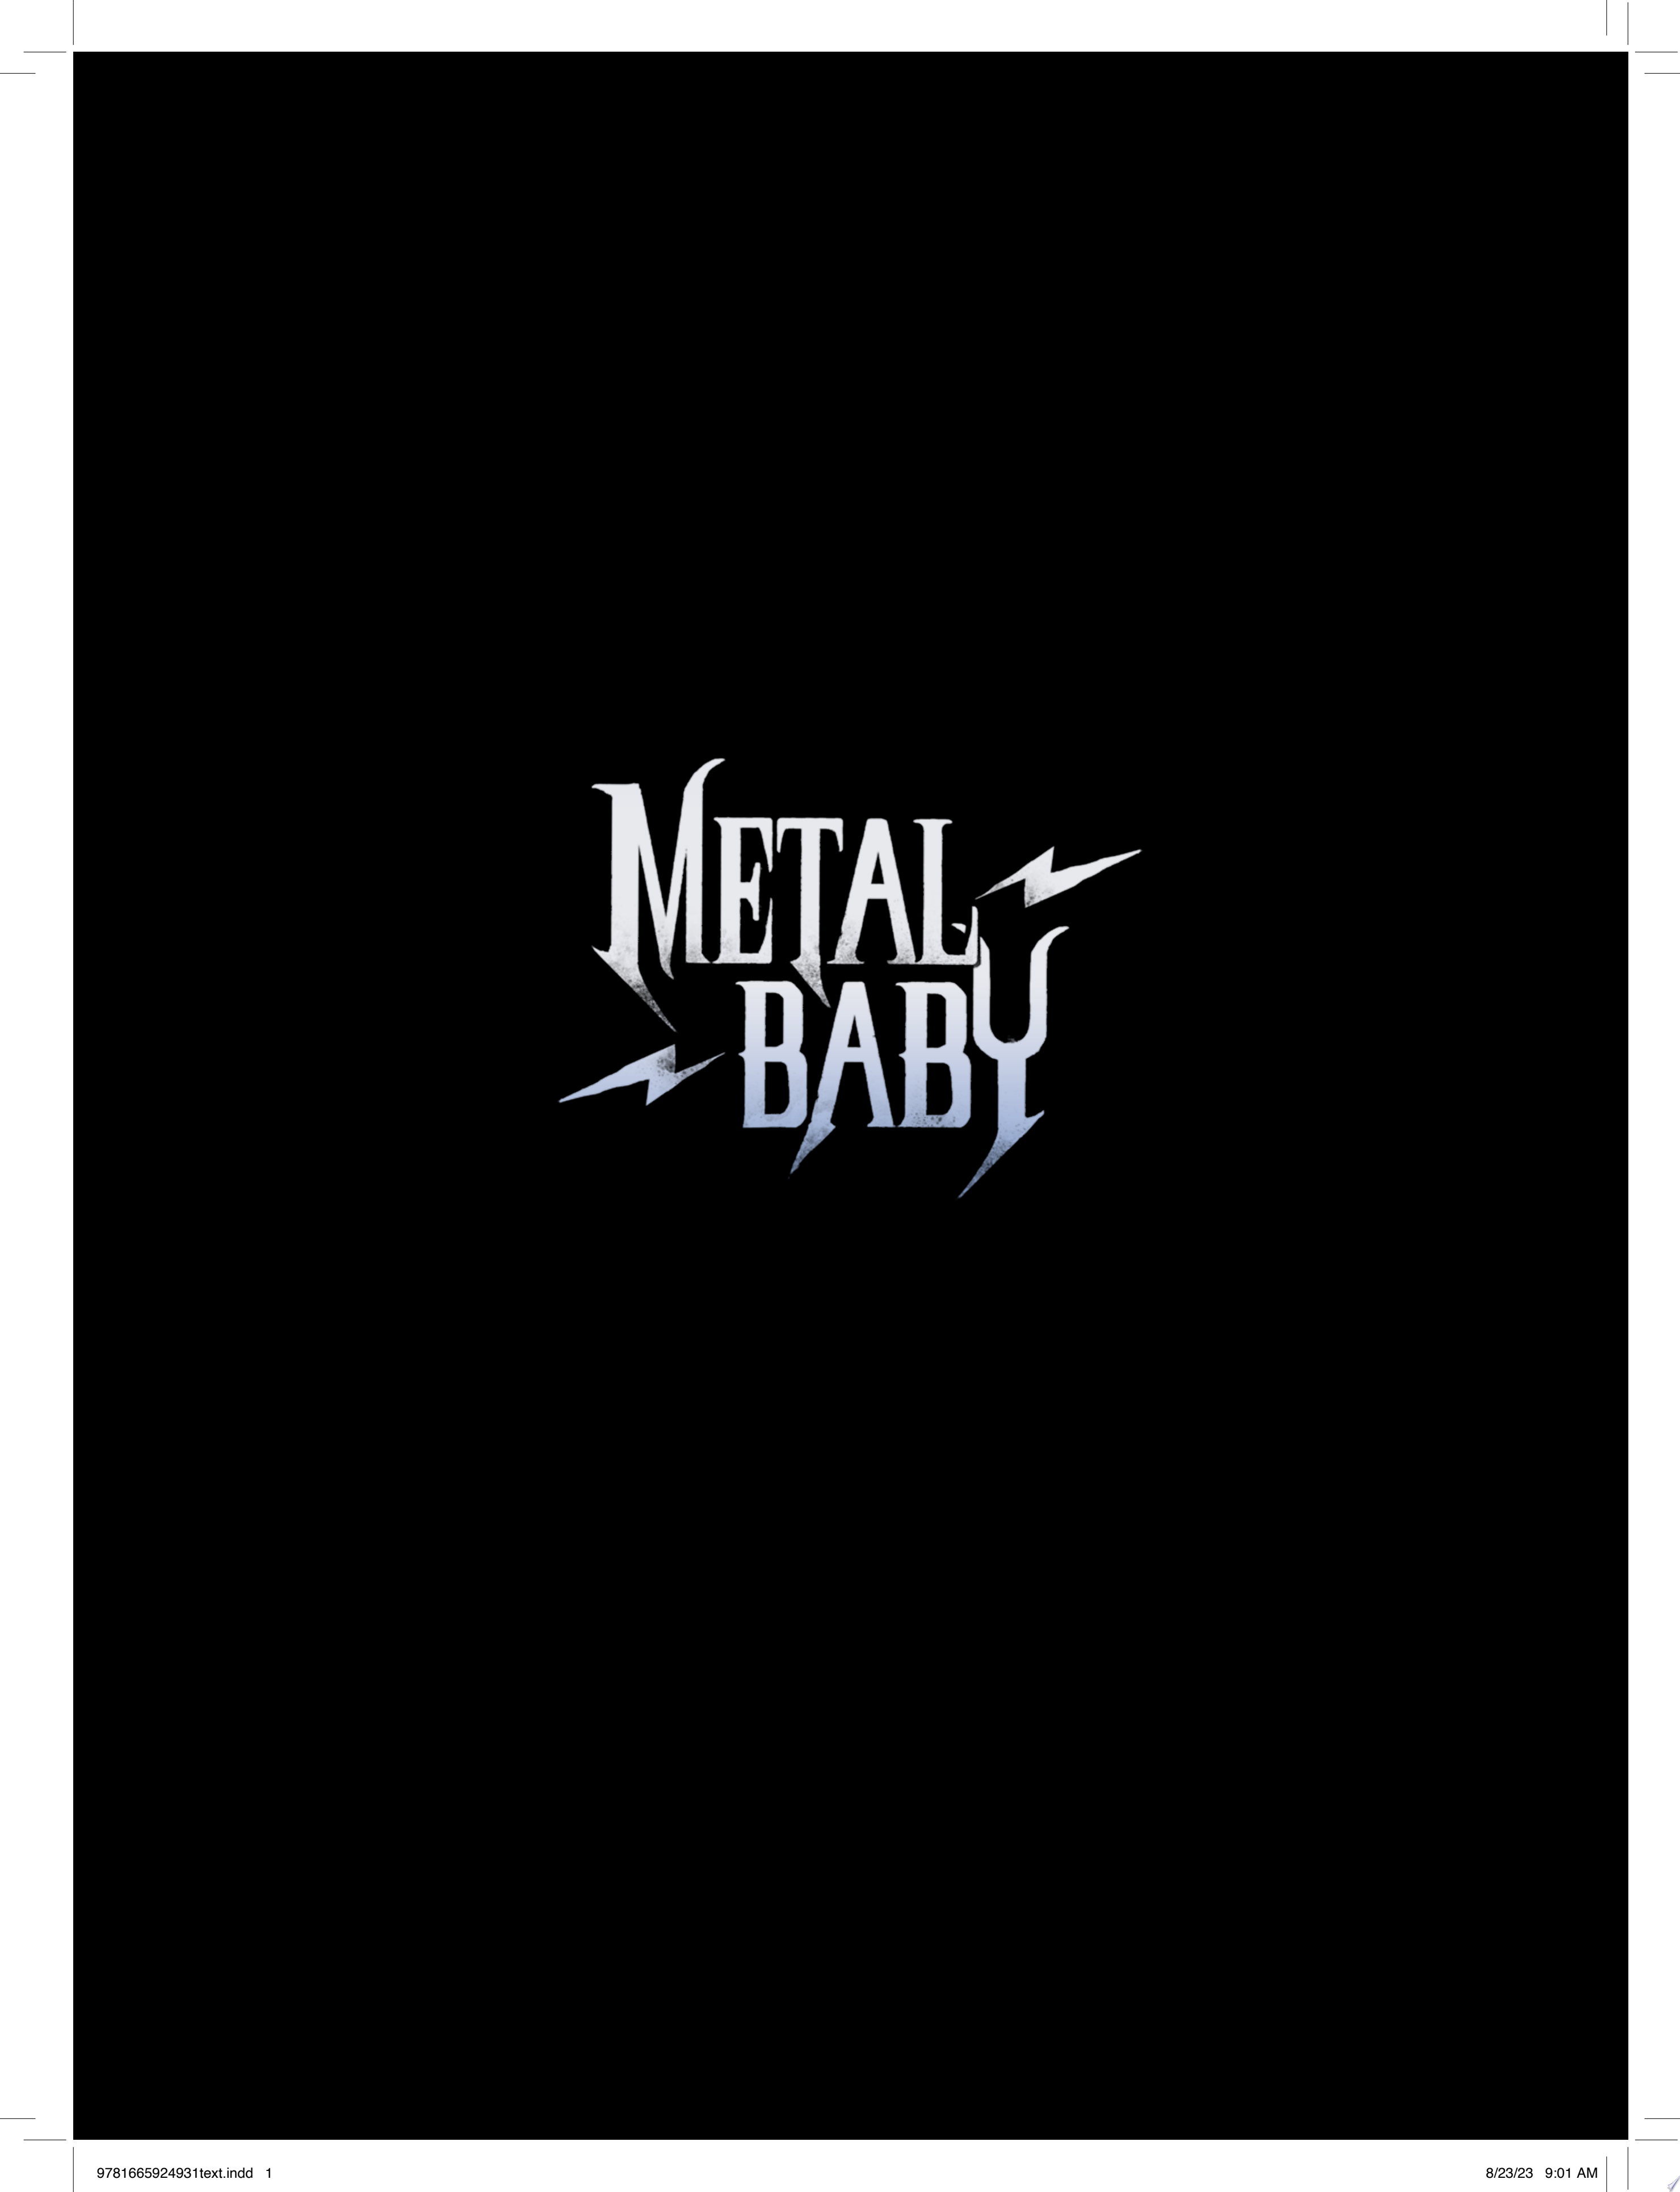 Image for "Metal Baby"